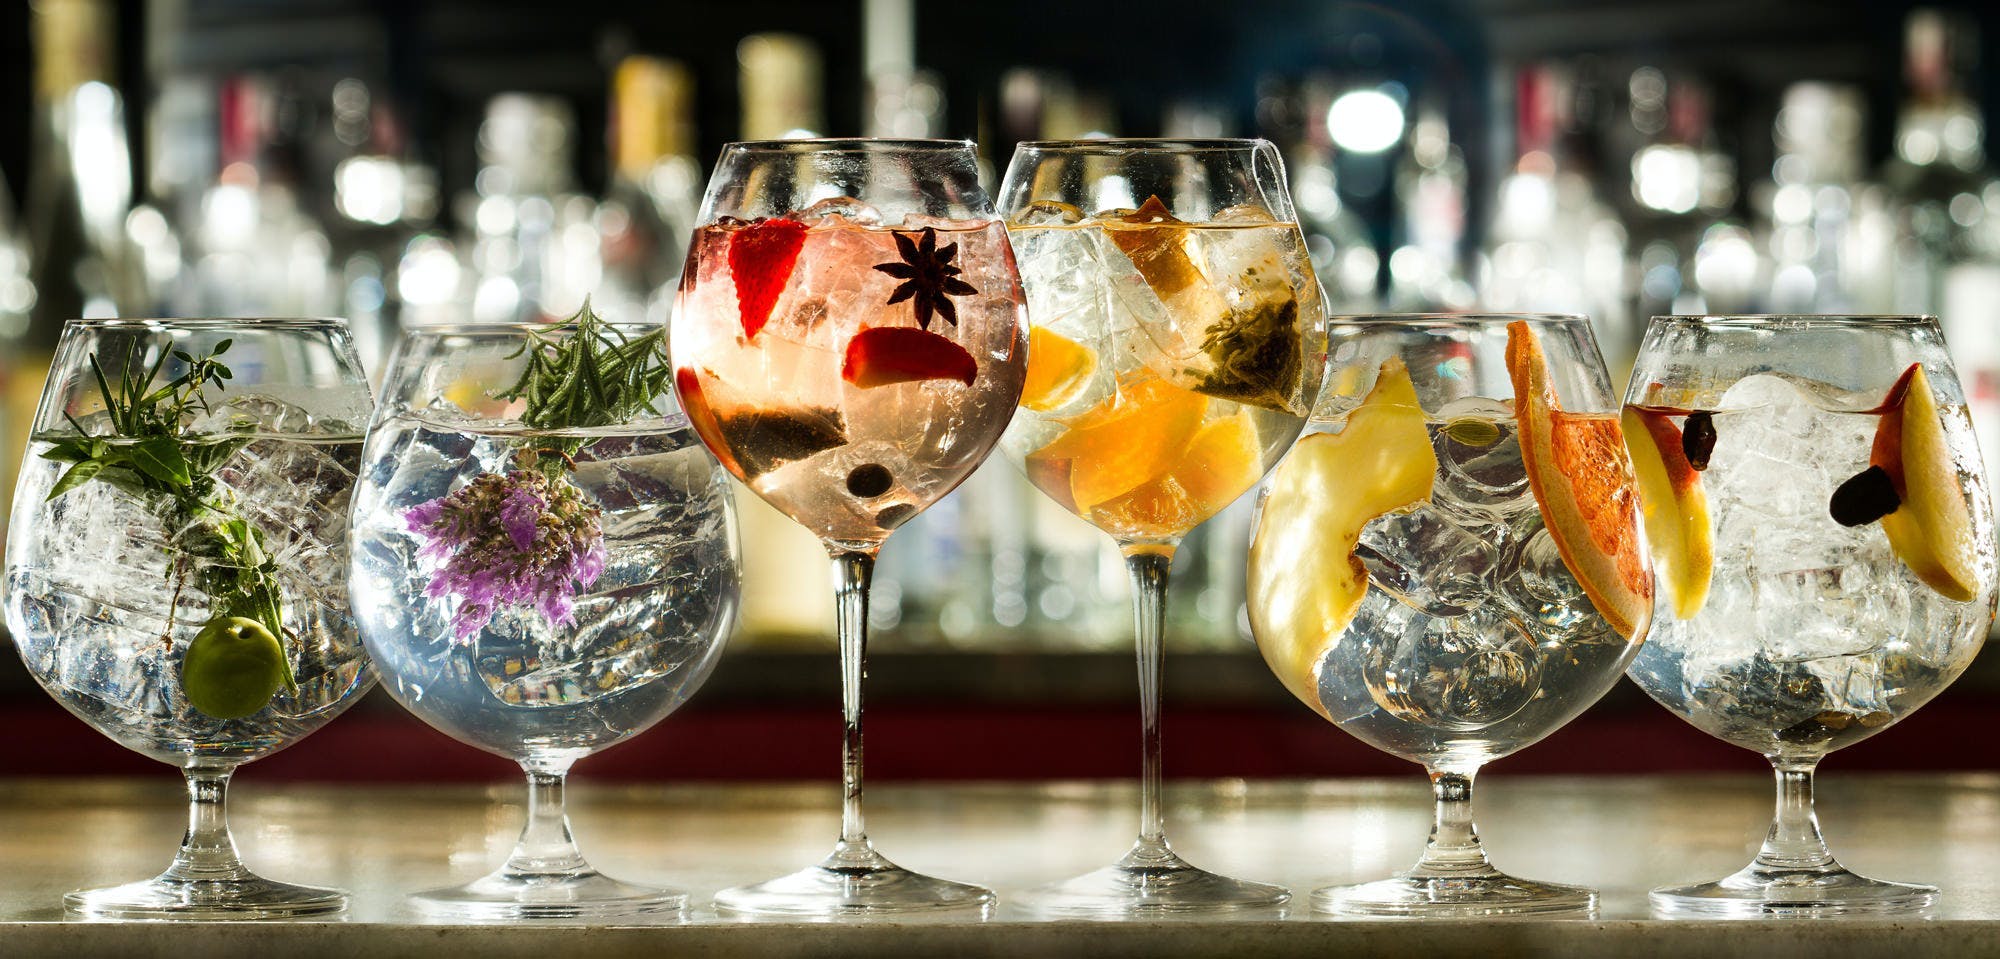 5 gintastic reasons to join the Craft Gin Club